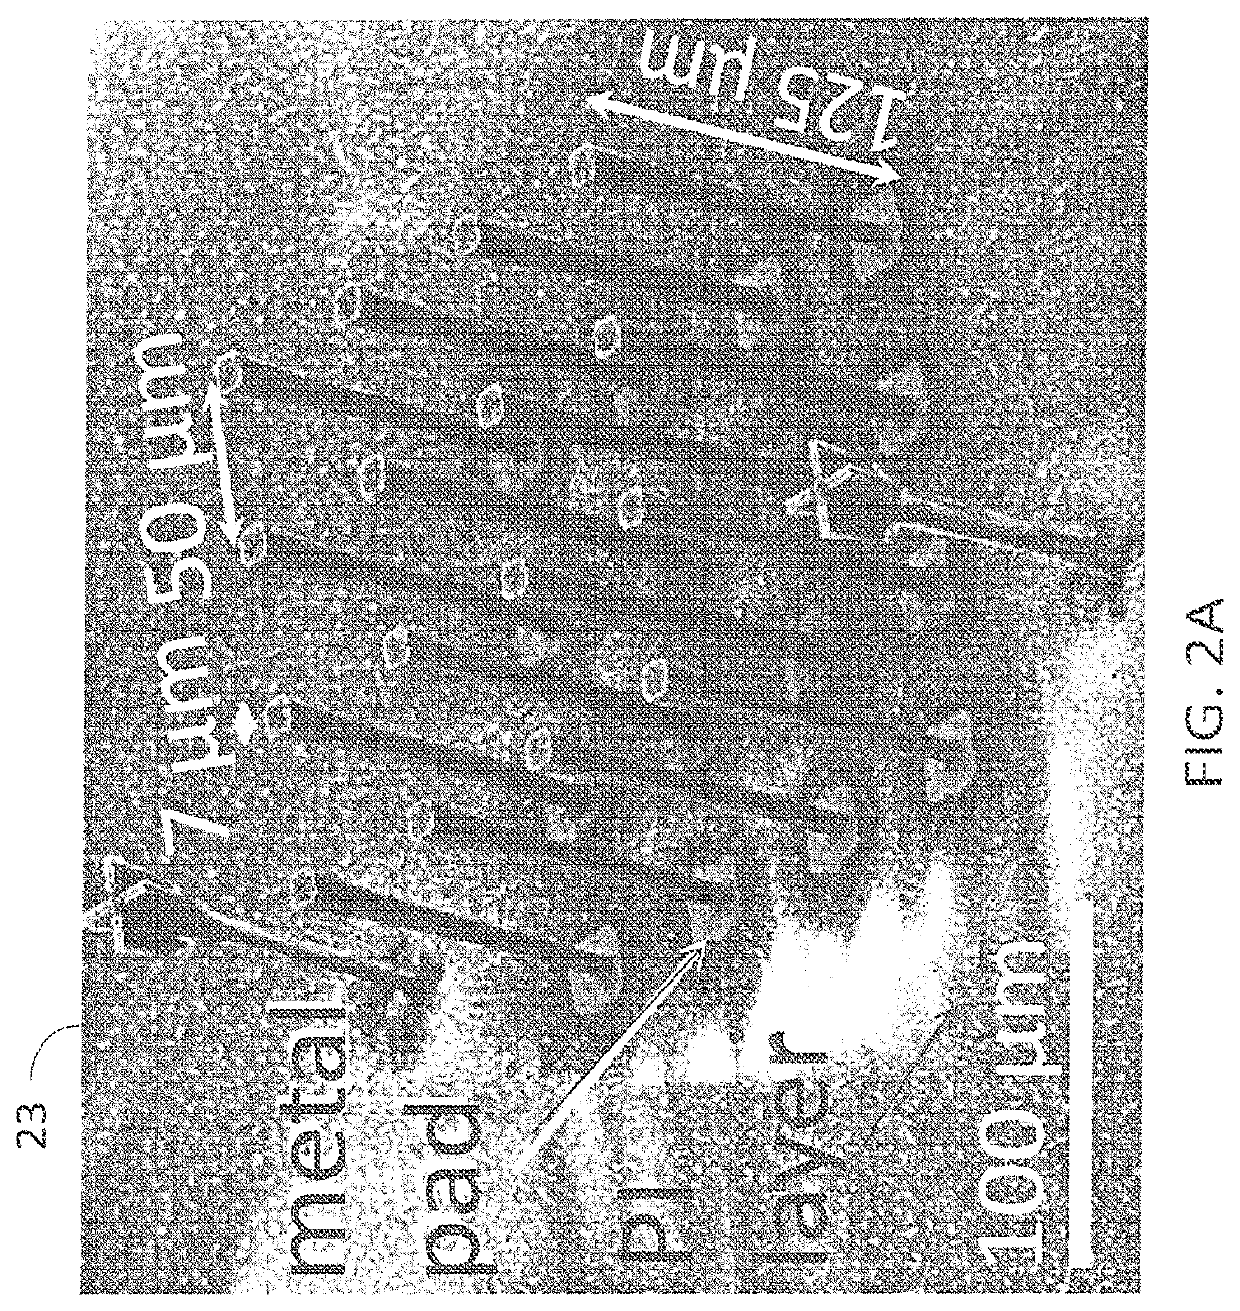 Method for forming a multielectrode conformal penetrating array